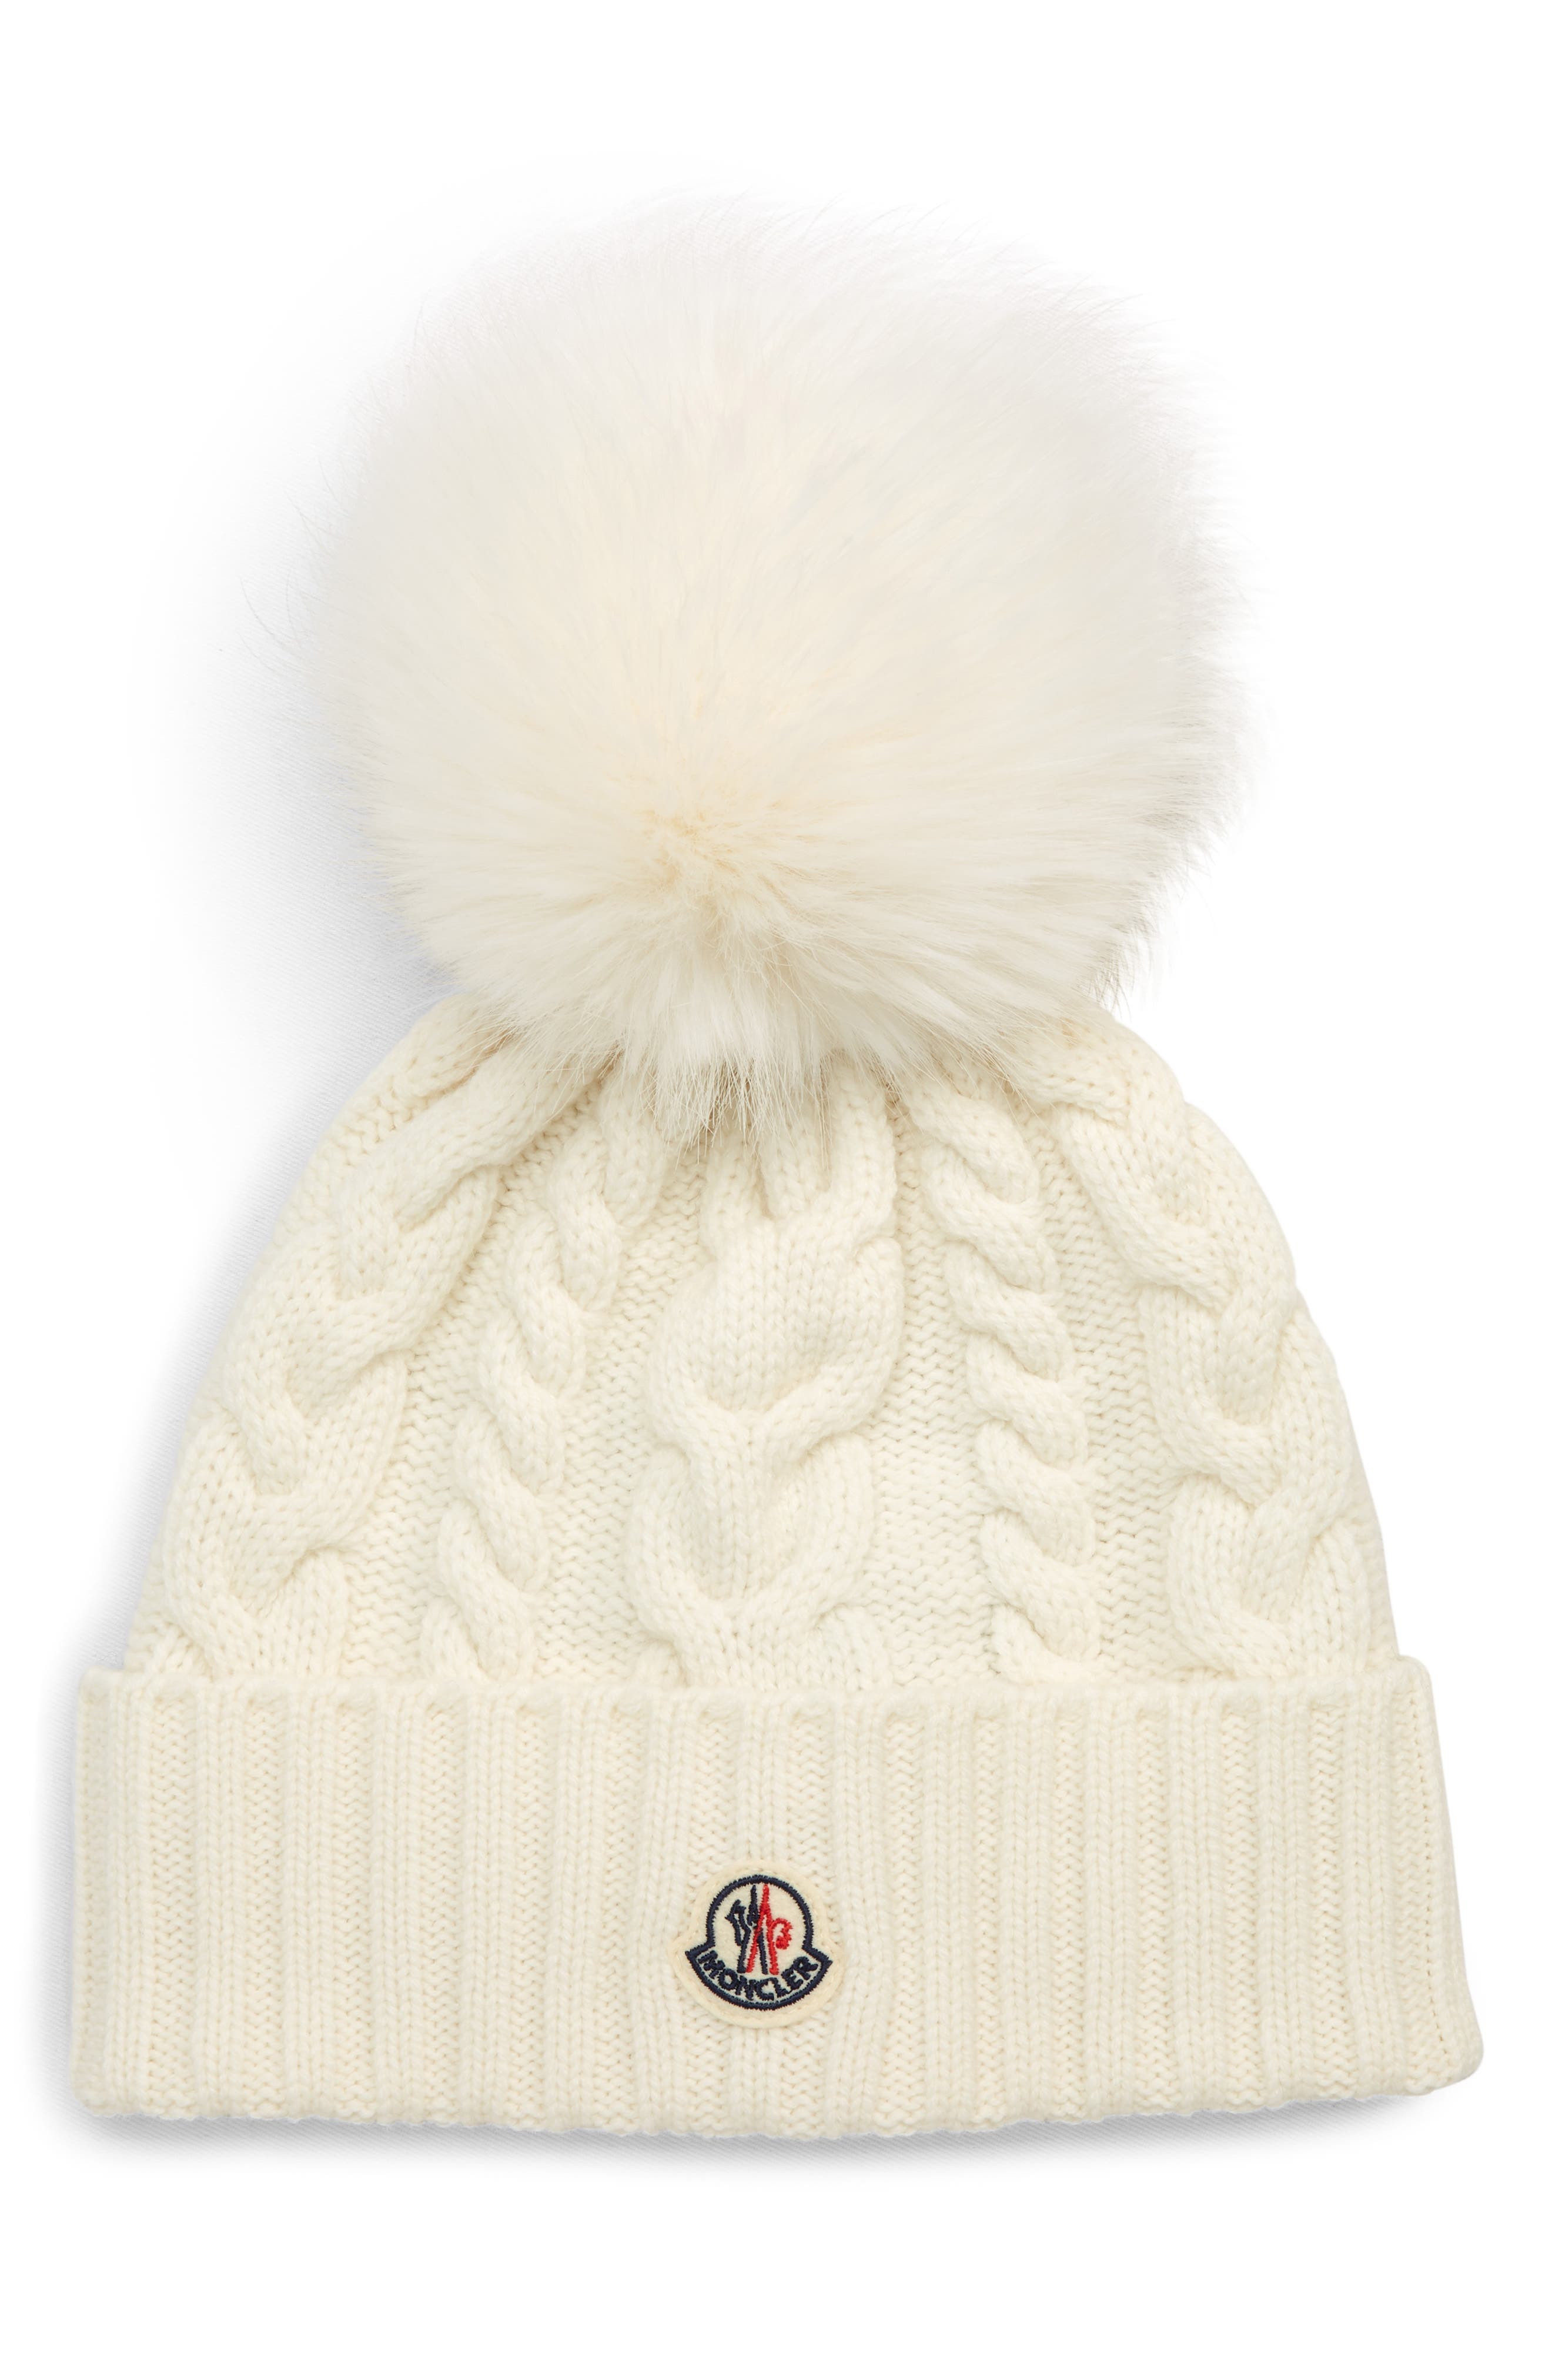 IRONMAN M-Dot Cable Knit Beanie Beige